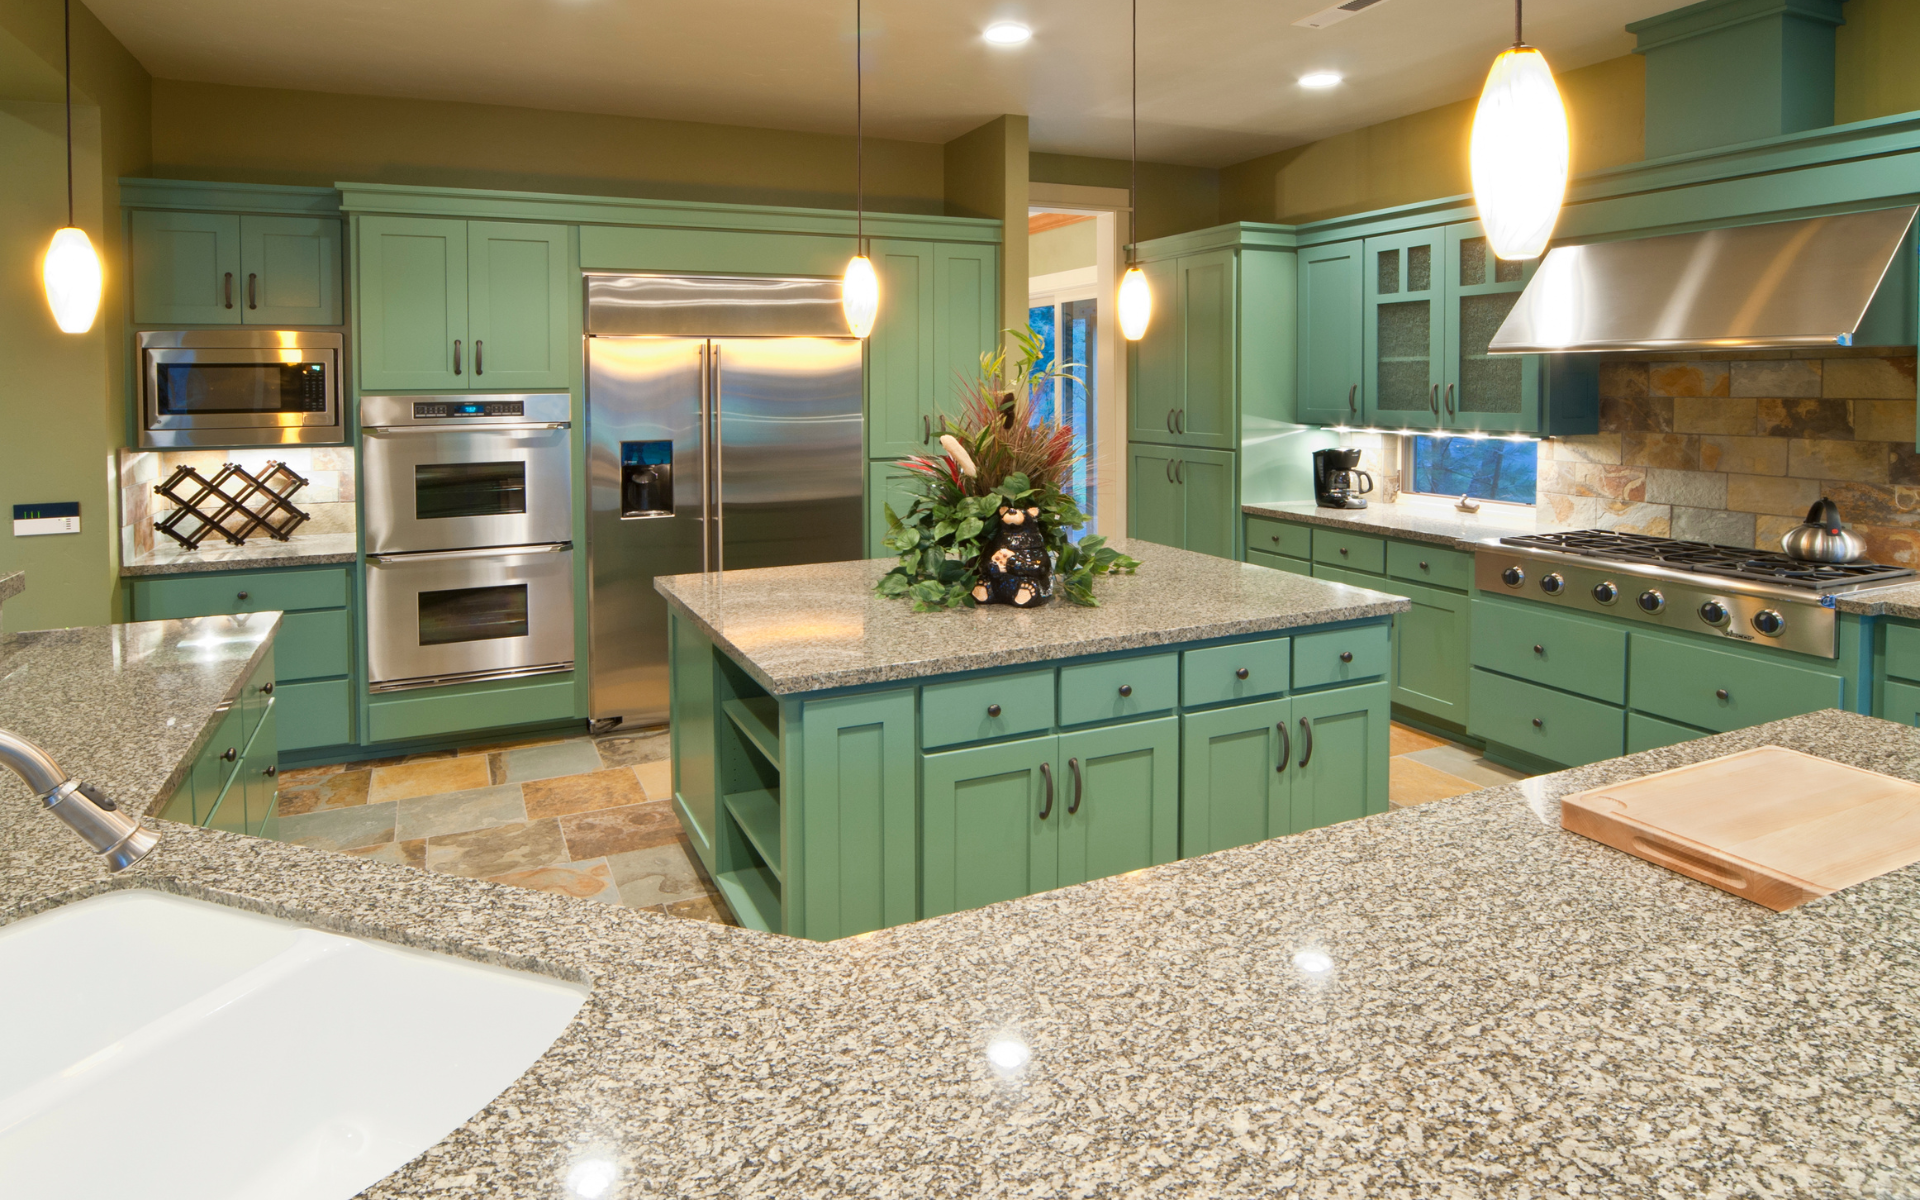 Spacious kitchen with green shaker cabinets, and granite countertop